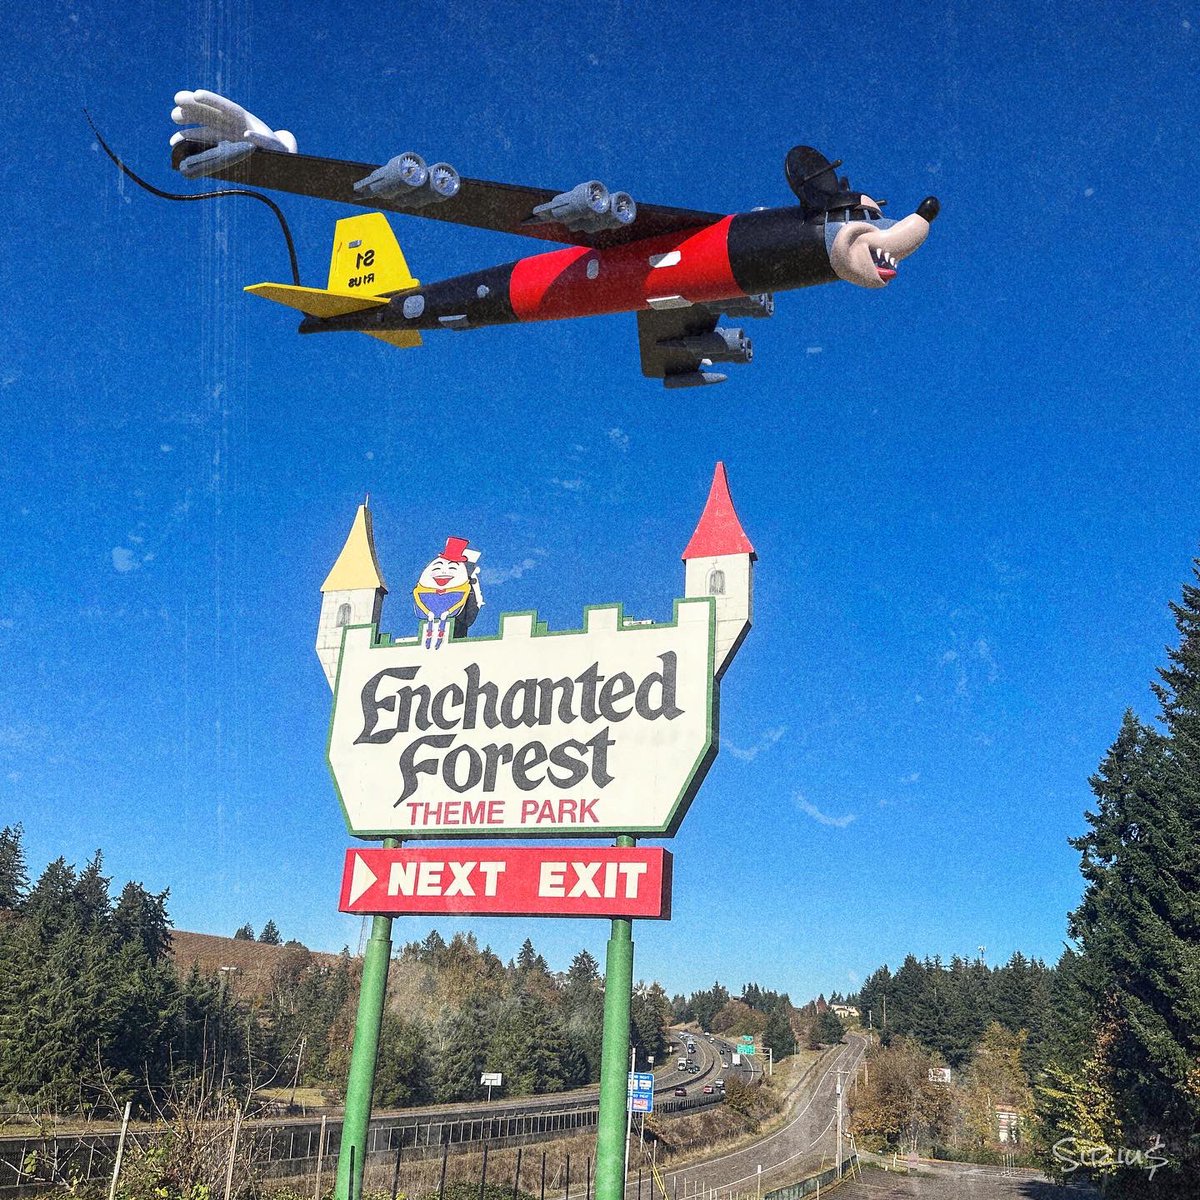 🐭✈️📡🏰🎡 mouse force one kicks off the amusement park cold wars by dice bombing tourists at local ma and pa amusement parks in Oregon. 😯 #enchantedforest #oregon #onlyinoregon #oregon #cabeladams #mixedreality #amusementpark #disney #mickeymouse #siriusvr #voxelbarf